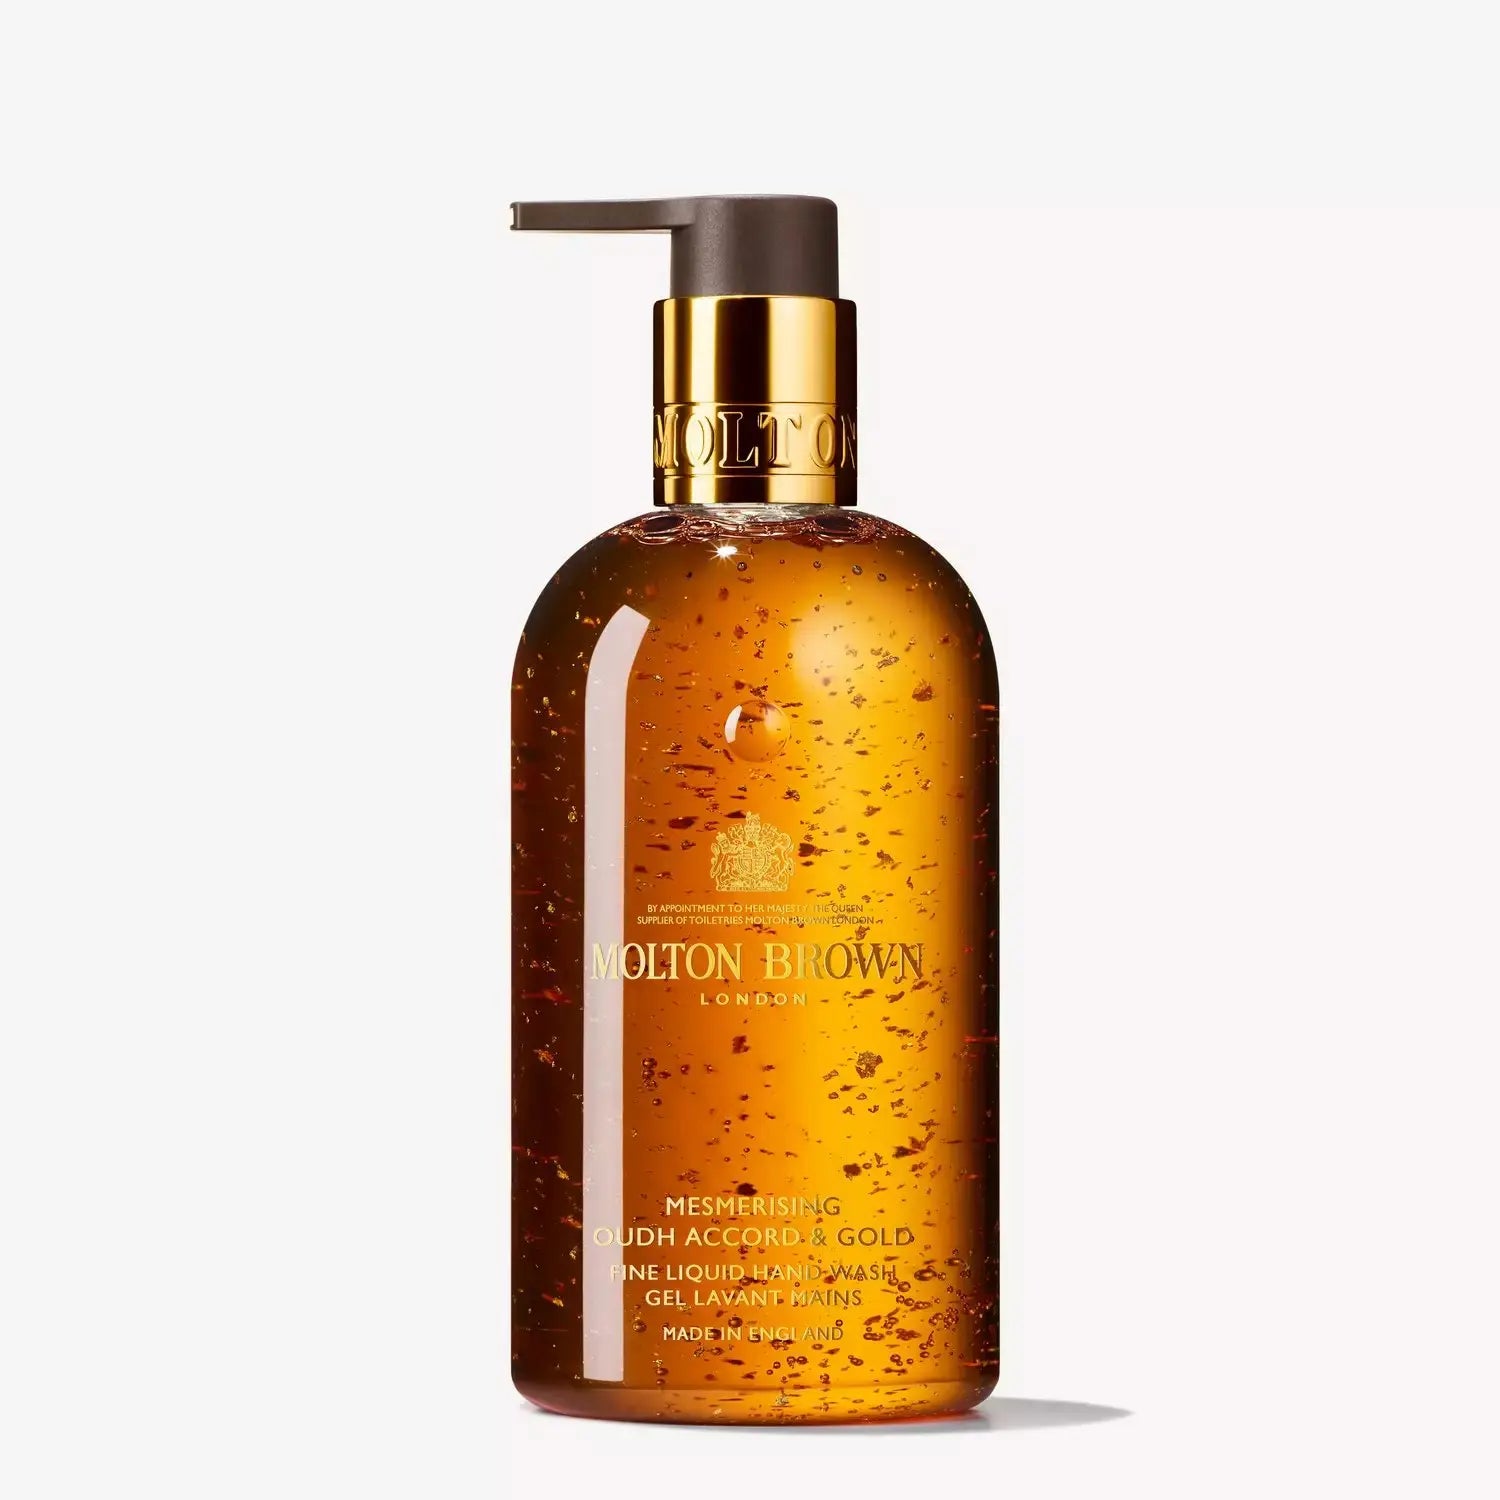 Molton Brown Mesmerizing Oudh Accord and Gold Hand Wash 